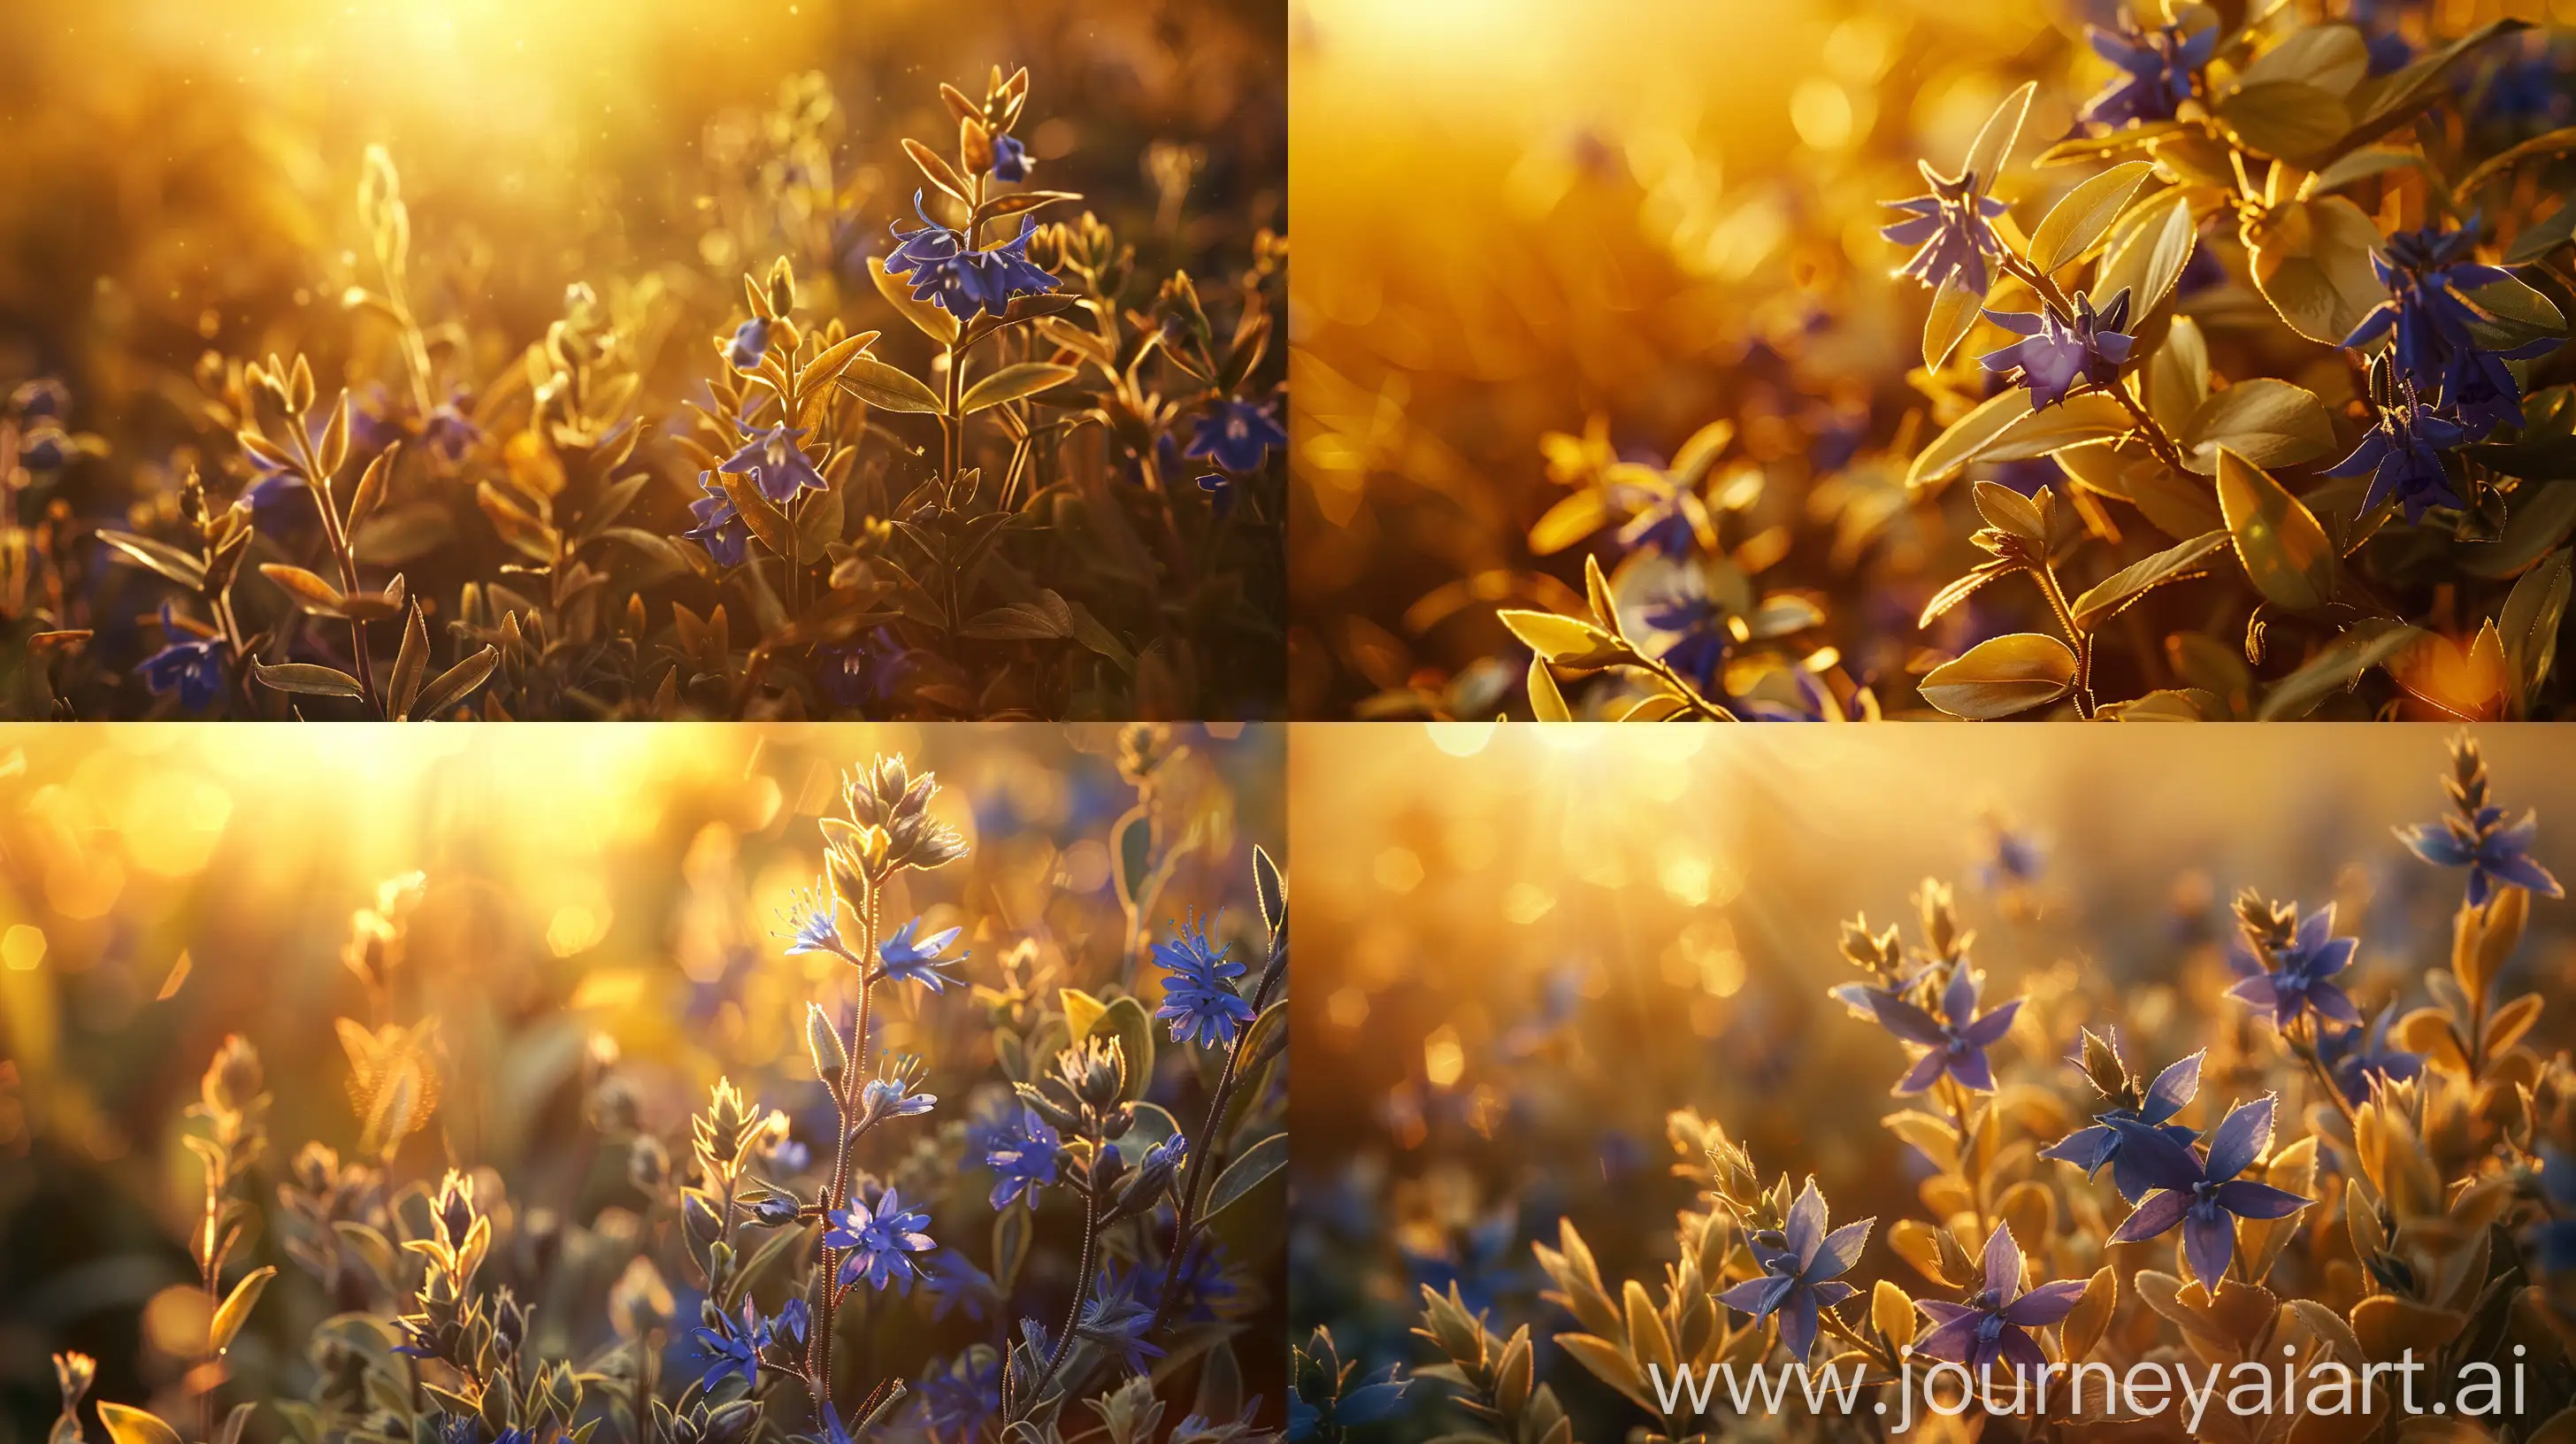 High detailed photo capturing a Tradescantia, Blue & Gold. The sun, casting a warm, golden glow, bathes the scene in a serene ambiance, illuminating the intricate details of each element. The composition centers on a Tradescantia, Blue & Gold. Commonly known as a spiderwort, Tradescantia Blue & Gold is a good plant for novice gardeners because its so easy to grow and the flowers and foliage are so attractive. It grows in many soil types, even wet, boggy sites, but it thrives in moist, well drai. The image evokes a sense of tranquility and natural beauty, inviting viewers to immerse themselves in the splendor of the landscape. --ar 16:9 